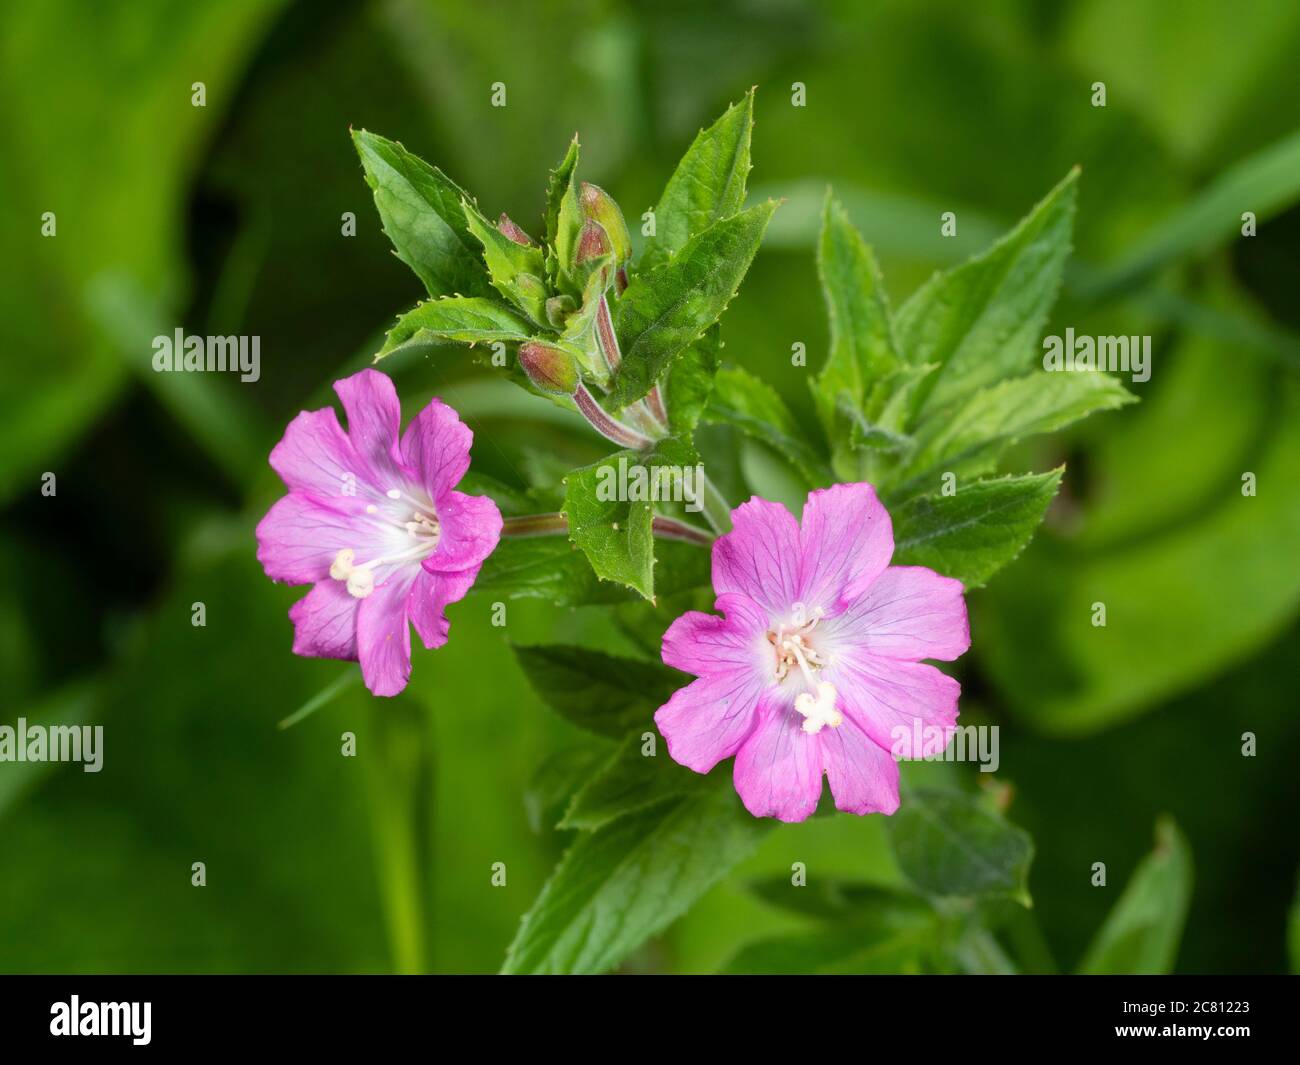 Close up of the pink flowers of the herbaceous perennial UK wildflower, Epilobium hirsutum, Great willowherb or Codlins and Cream Stock Photo